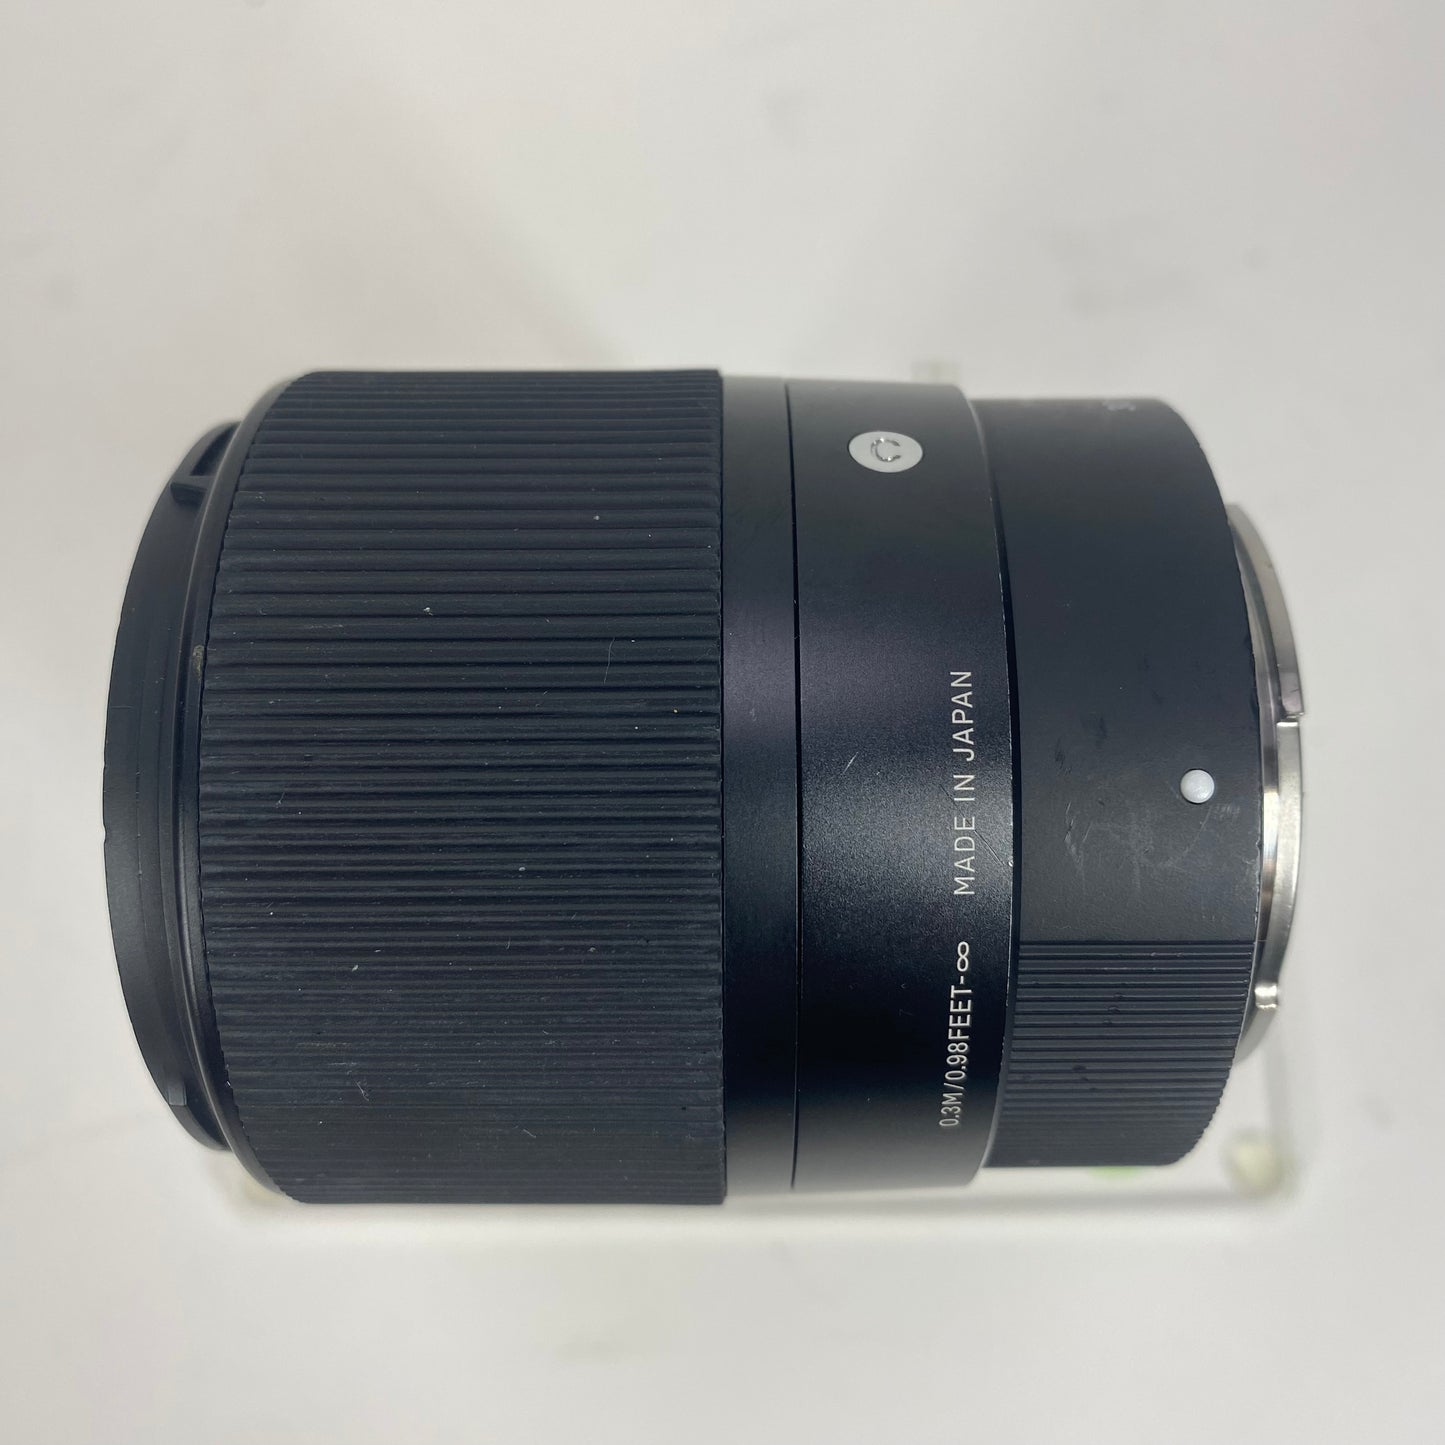 Sigma DC DN 52 30mm f/1.4 For Sony E-Mount